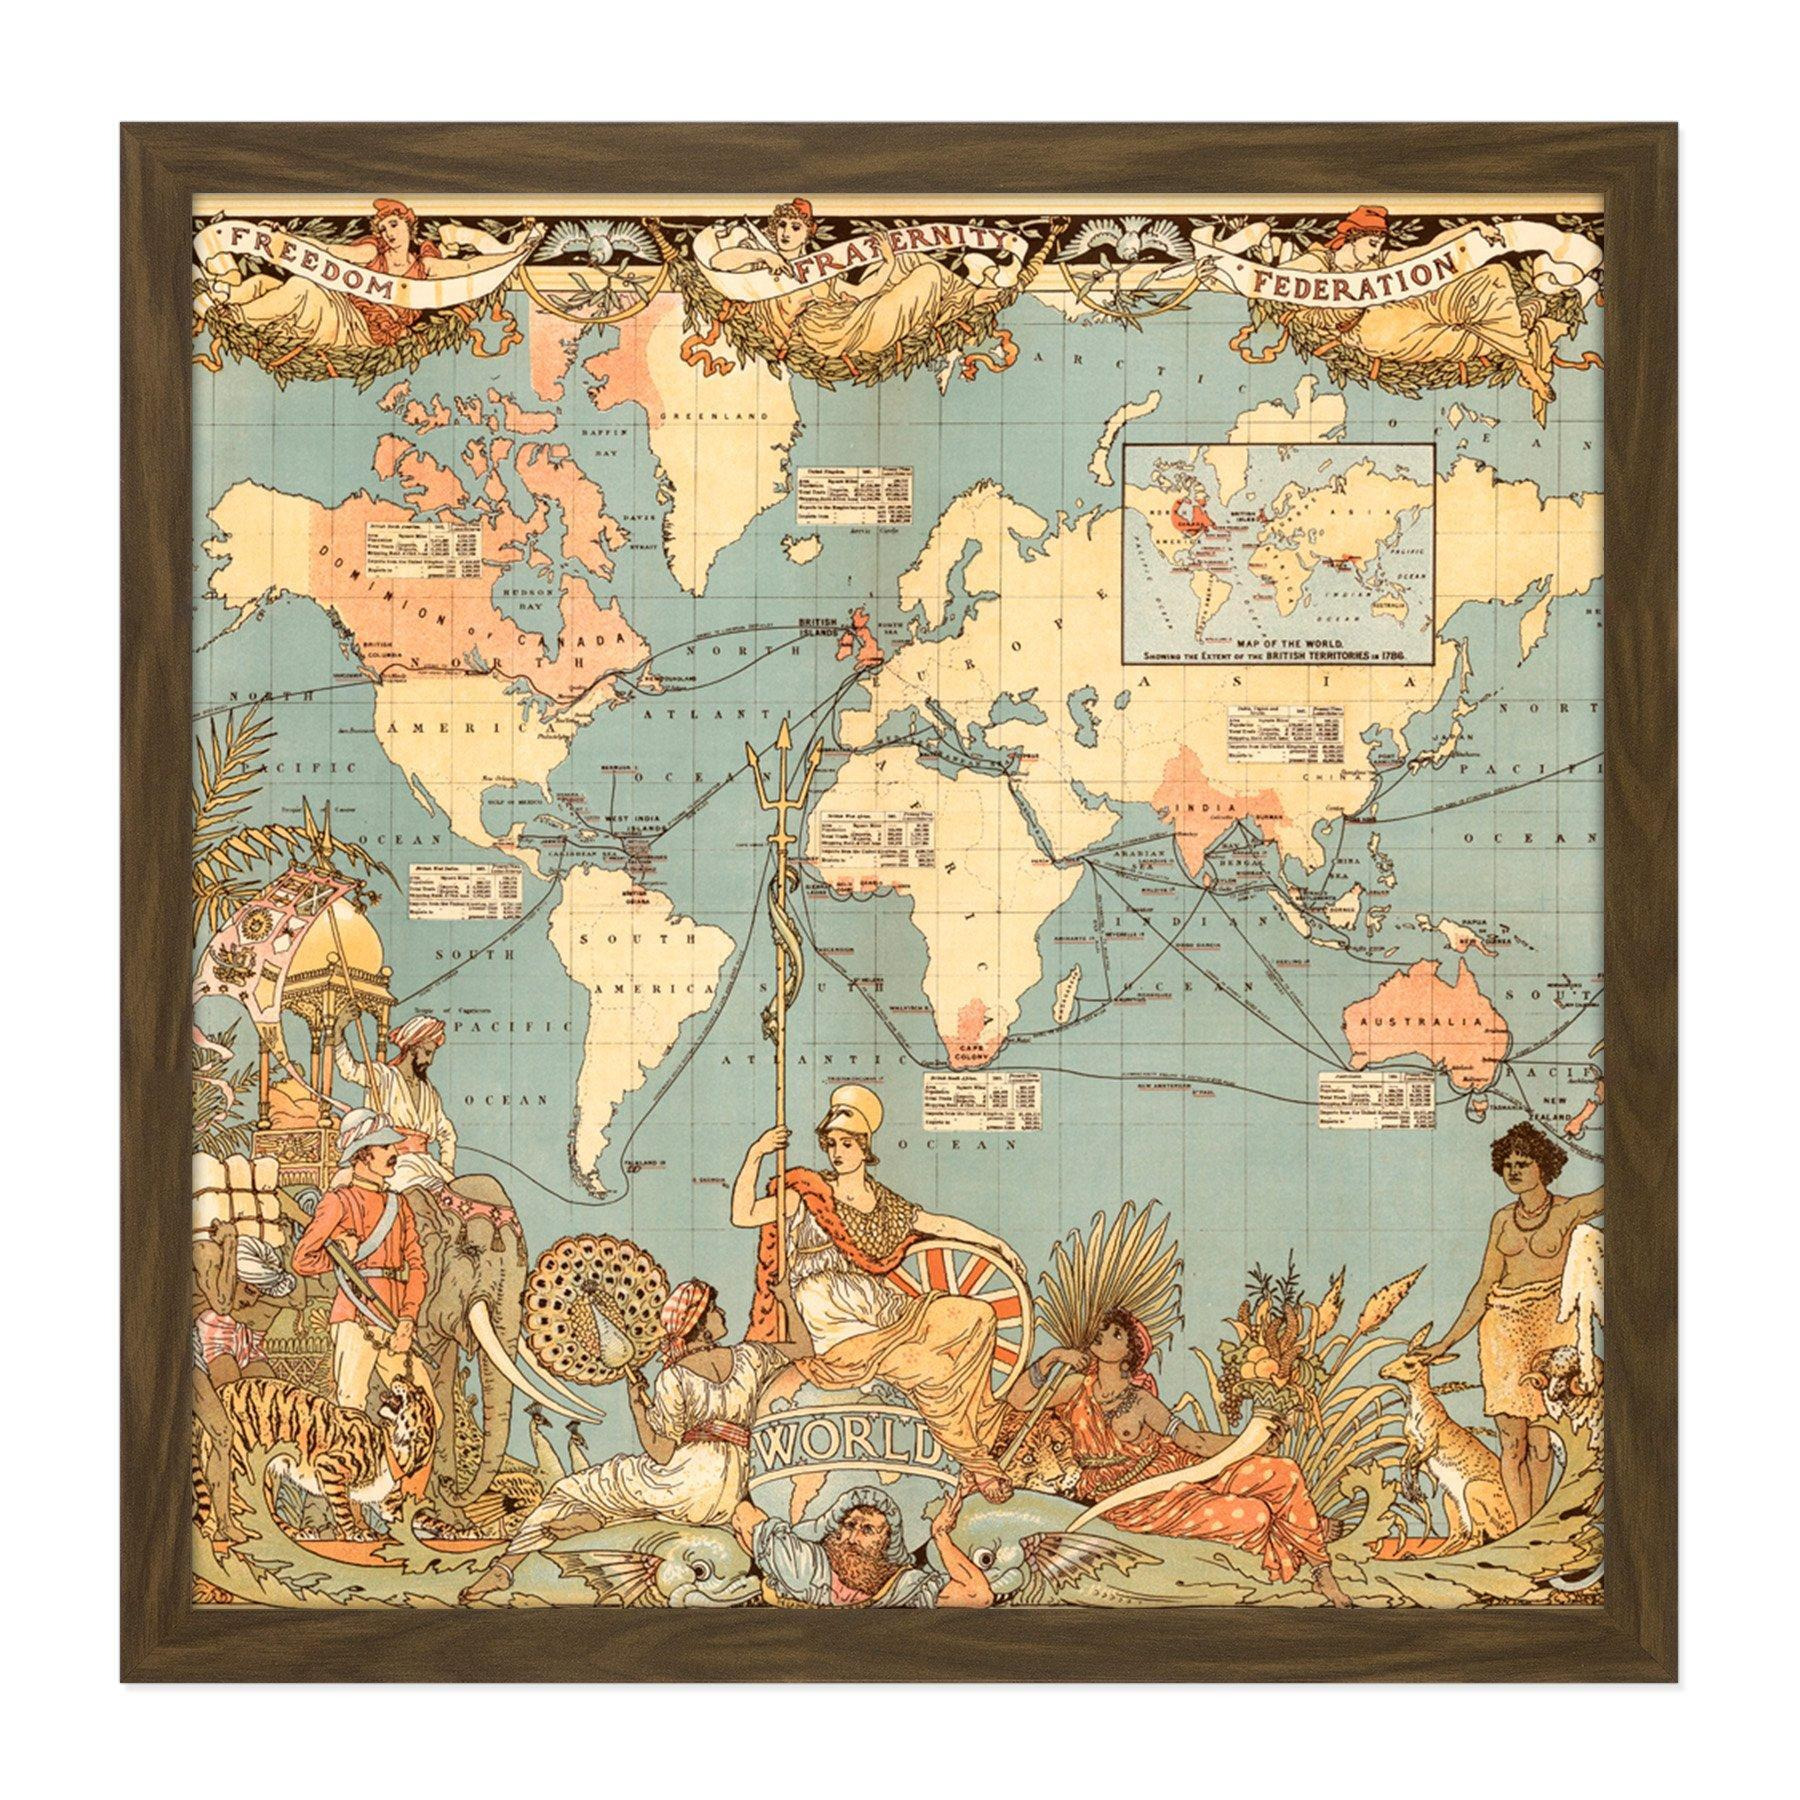 Map Colomb 1886 Extent British Empire Square Framed Wall Art Print Picture 16X16 Inch - image 1